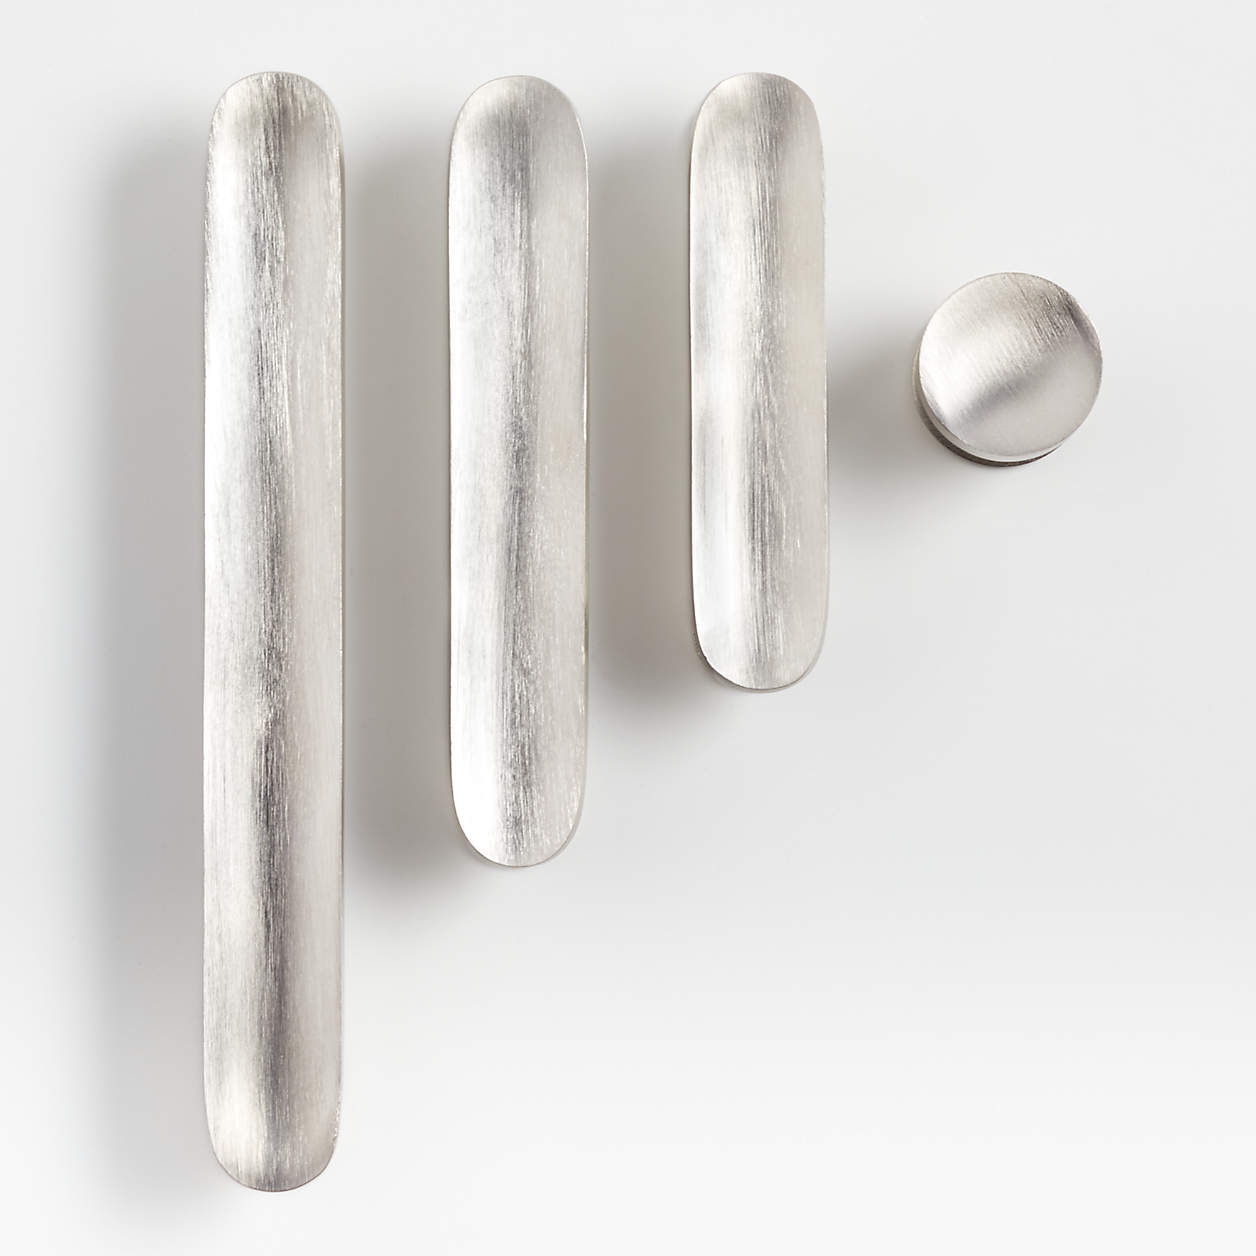 Oval Brushed Nickel Knob and Handles Crate and Barrel Canada